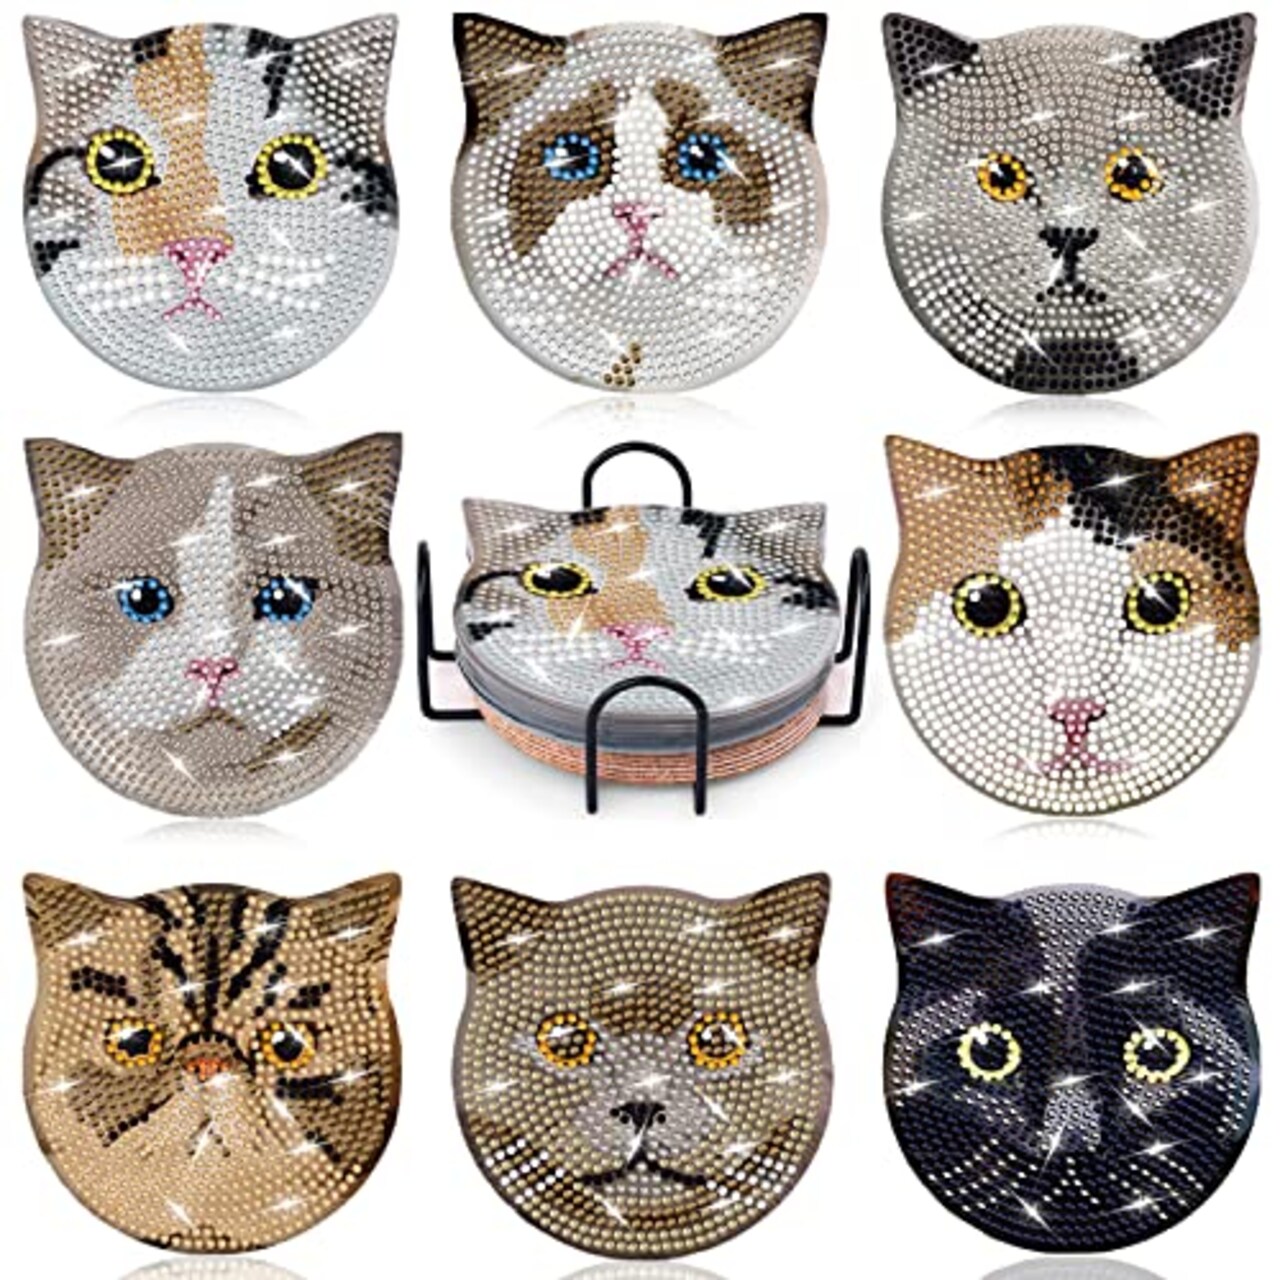 Billbotk 8 Pieces Diamond Painting Coasters Kit with Holder, Diamond Art  Coasters, DIY Diamond Art Crafts Projects, Diamond Dotz Kits for Adults and  Beginners(Cat Style)